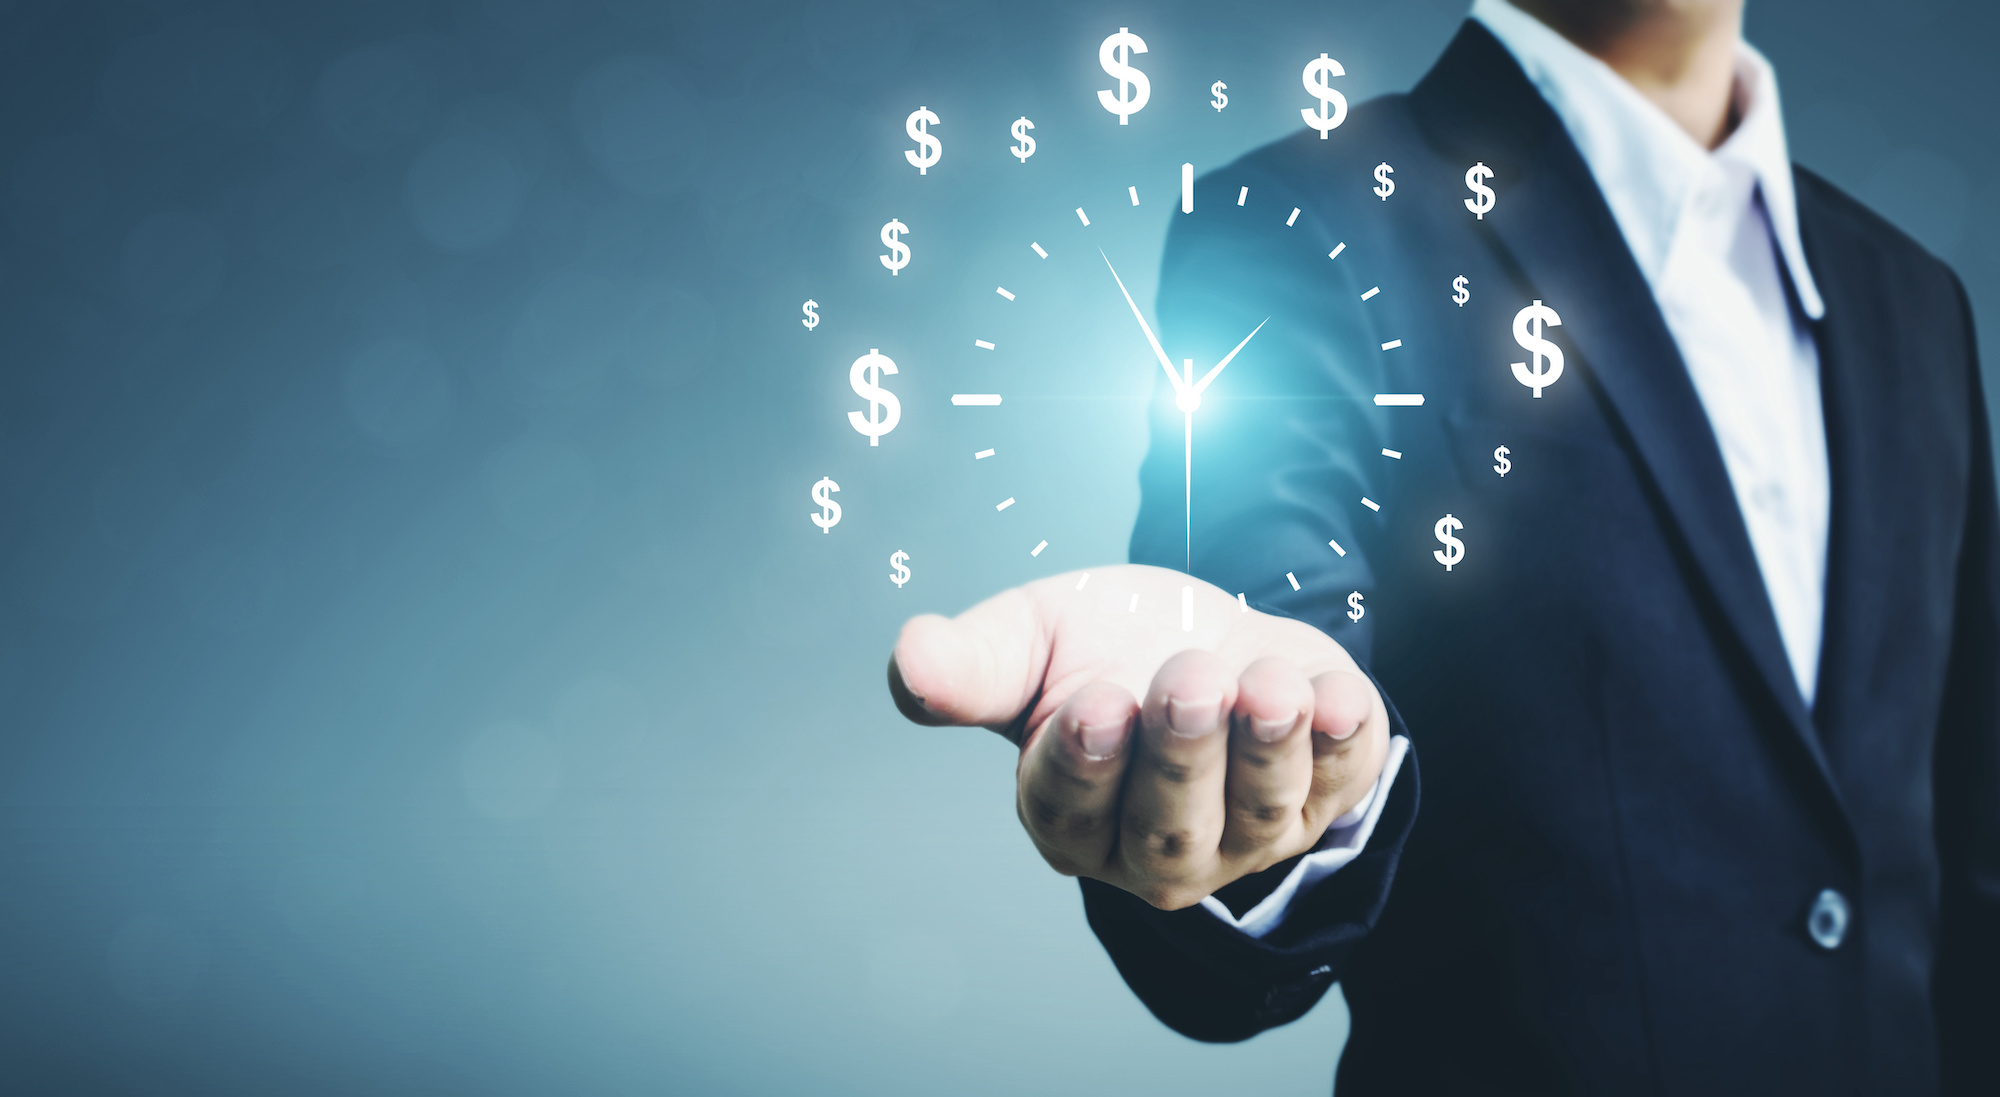 Man holding up glowing money and clock image